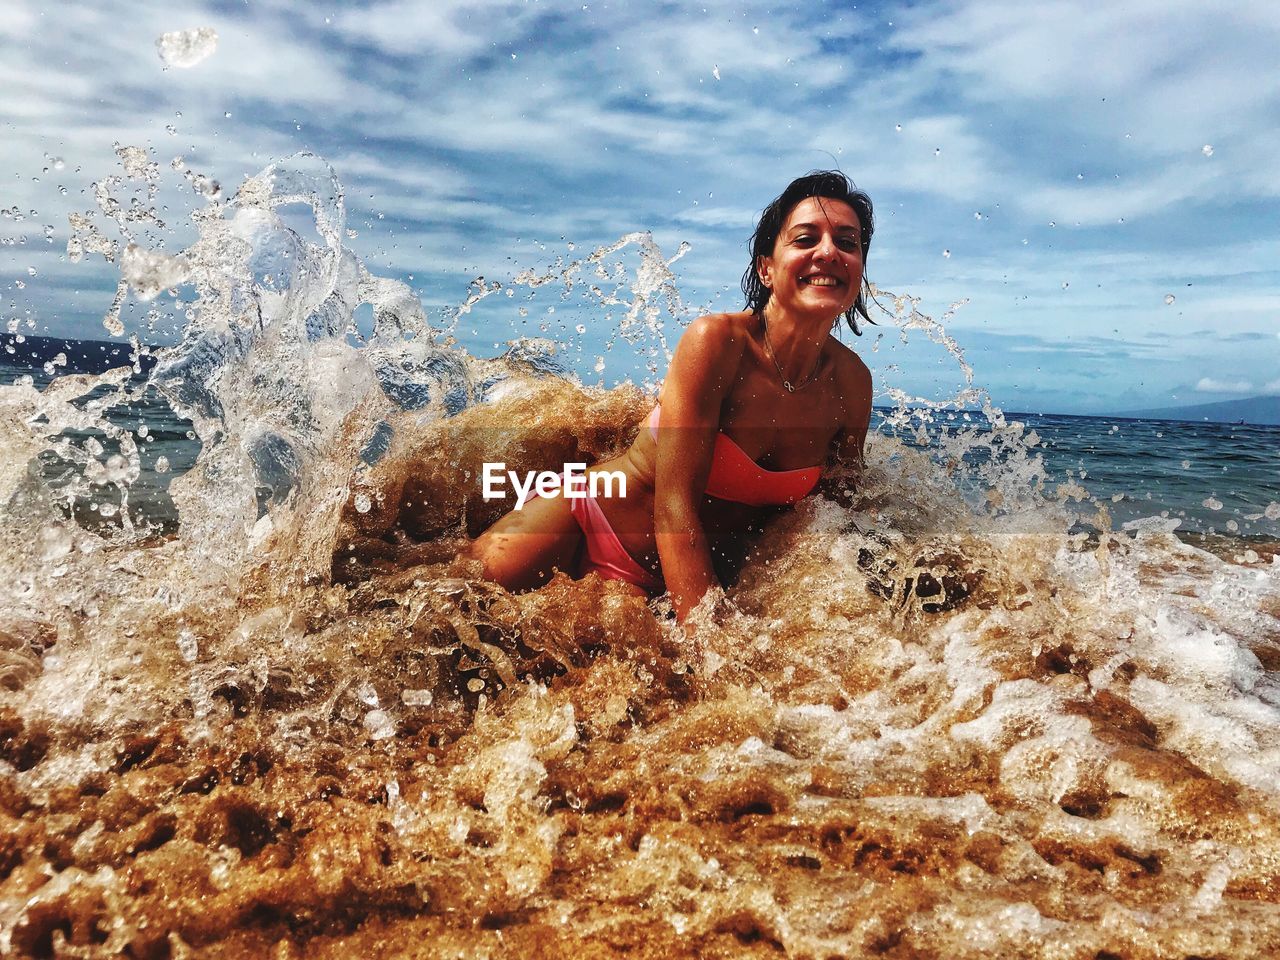 Portrait of smiling woman playing in waves on shore at beach